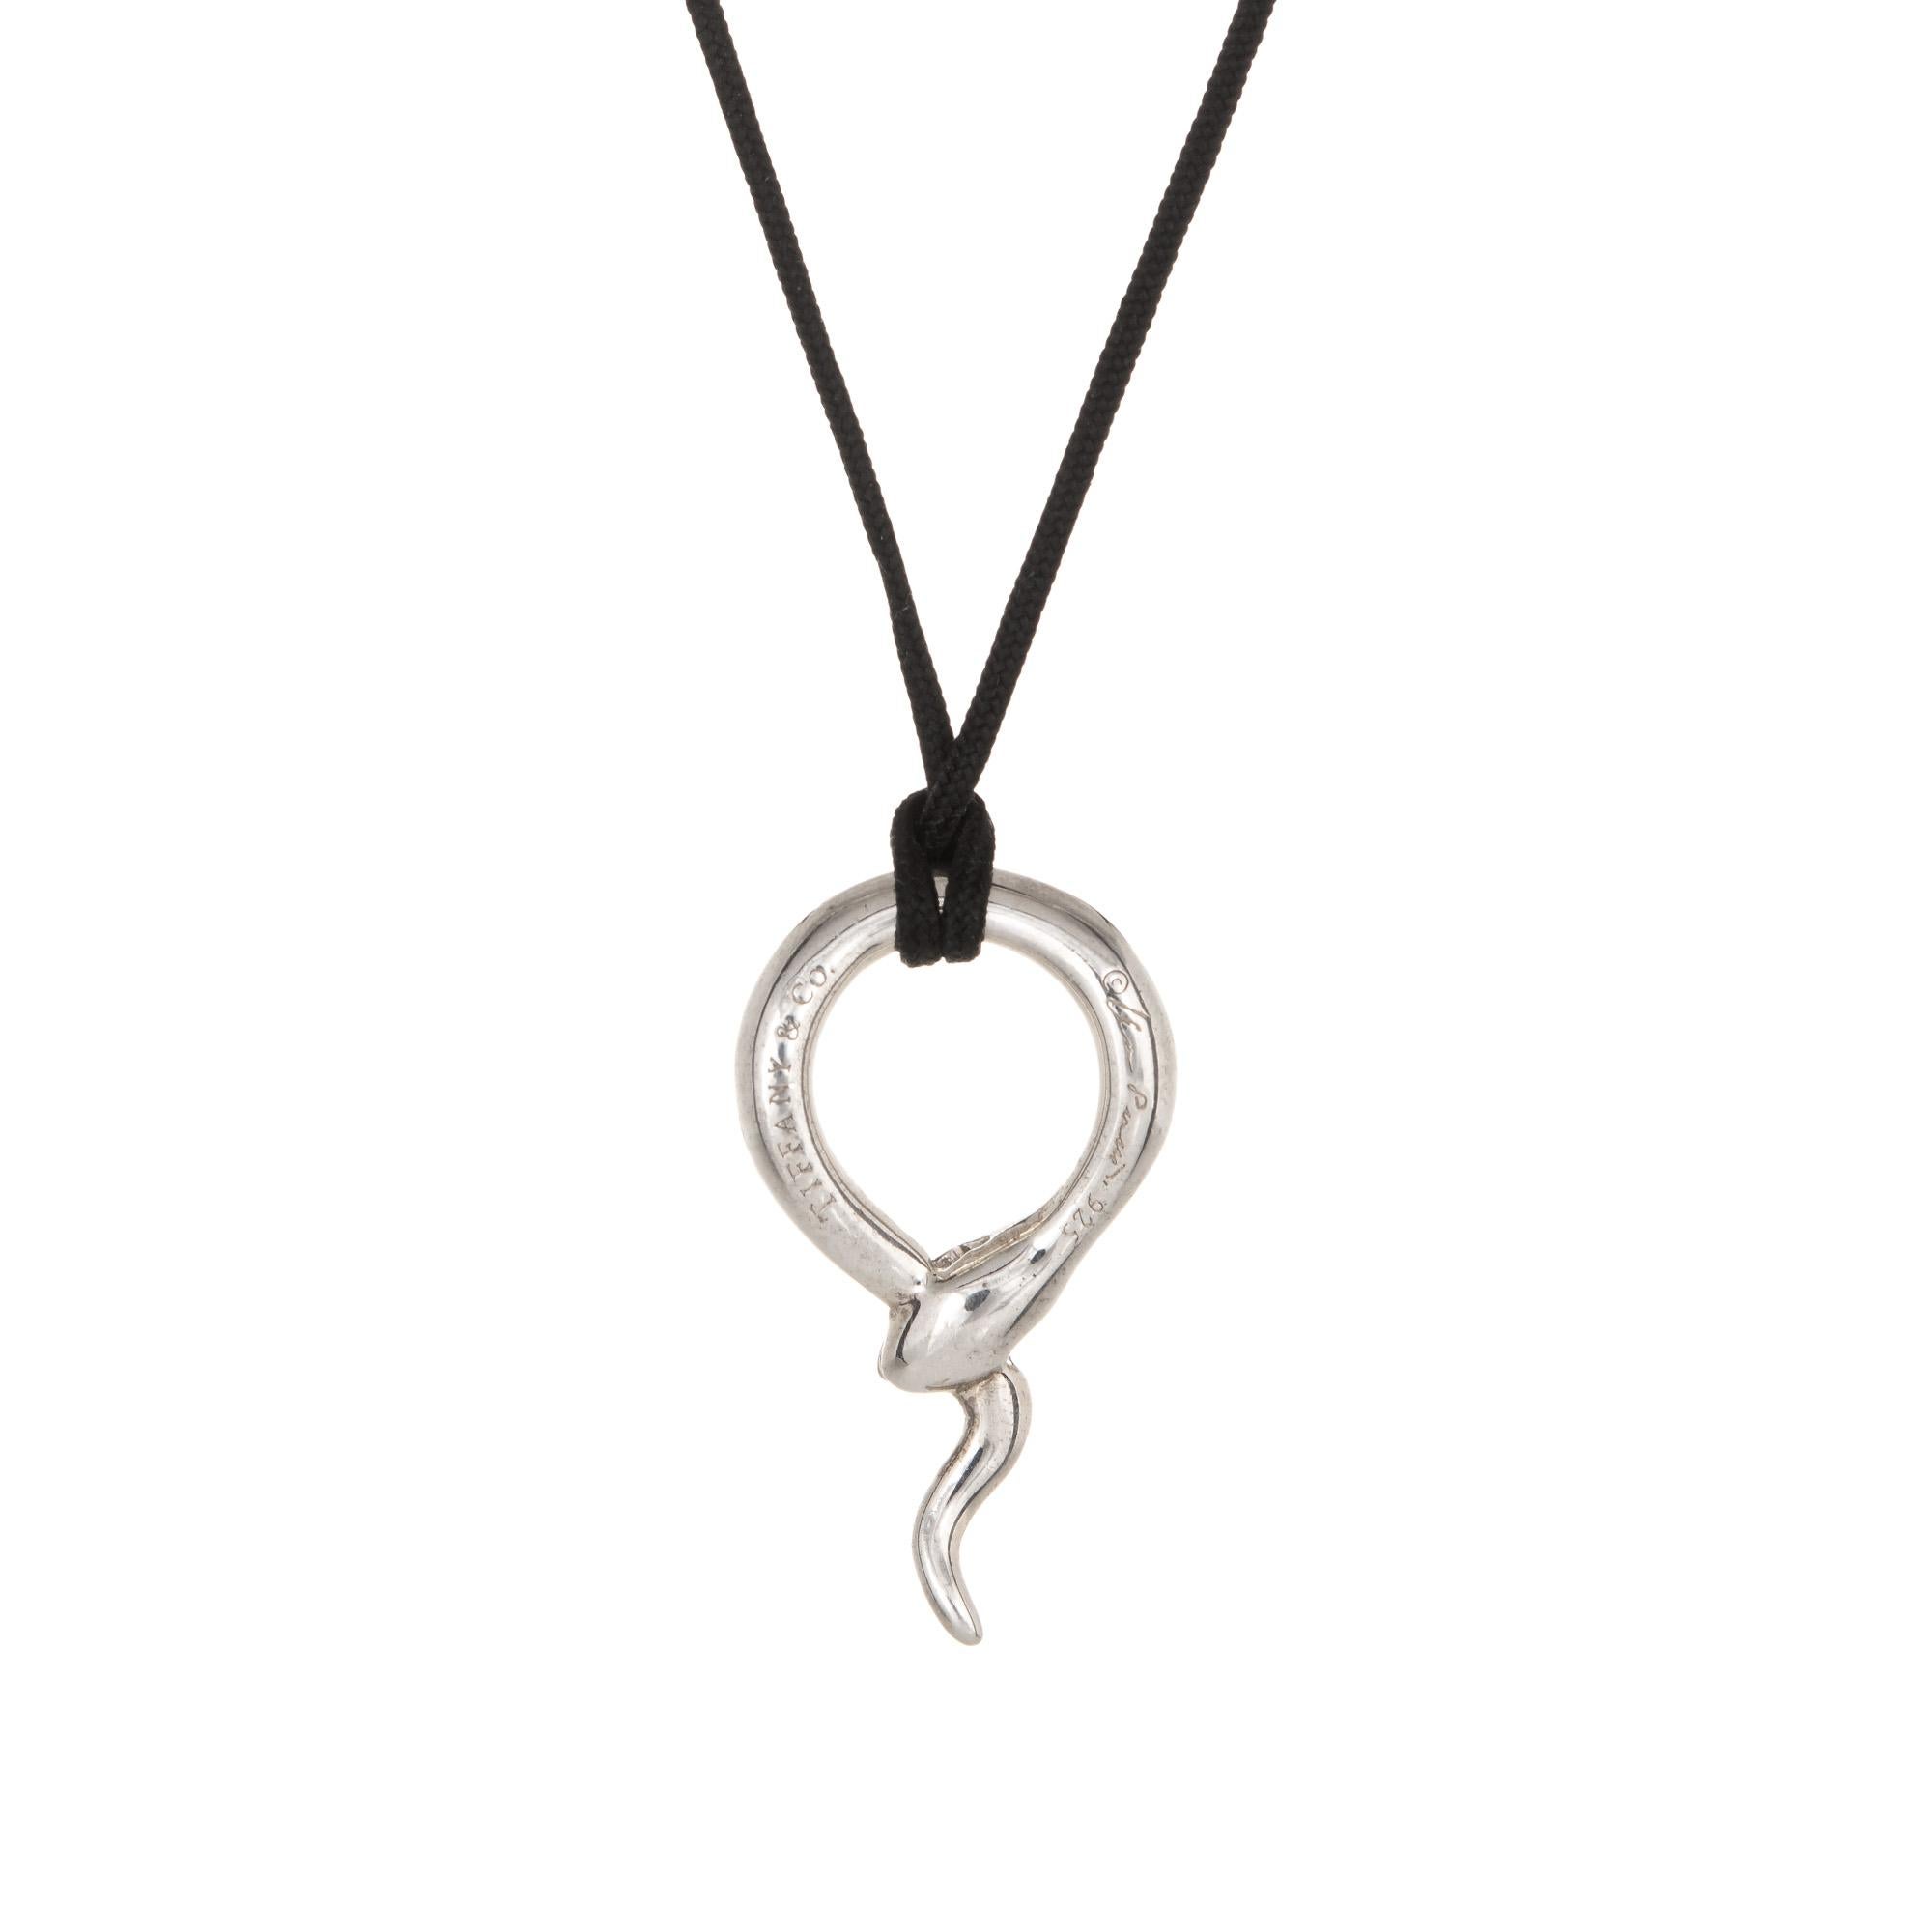 Finely detailed pre owned Tiffany & Co snake necklace crafted in sterling silver.  

The ouroboros snake is hung from black silk cord. The necklace is in very good condition and was recently professionally cleaned and polished.